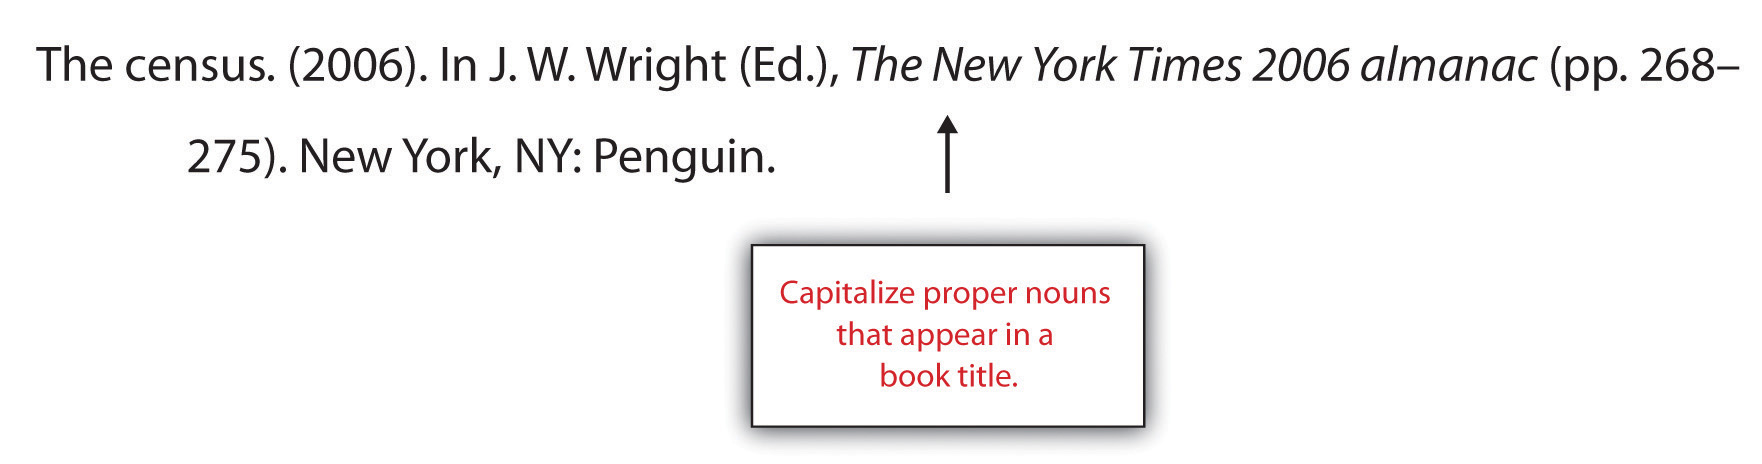 Capitalize proper nouns that appear in a book title while creating a references section